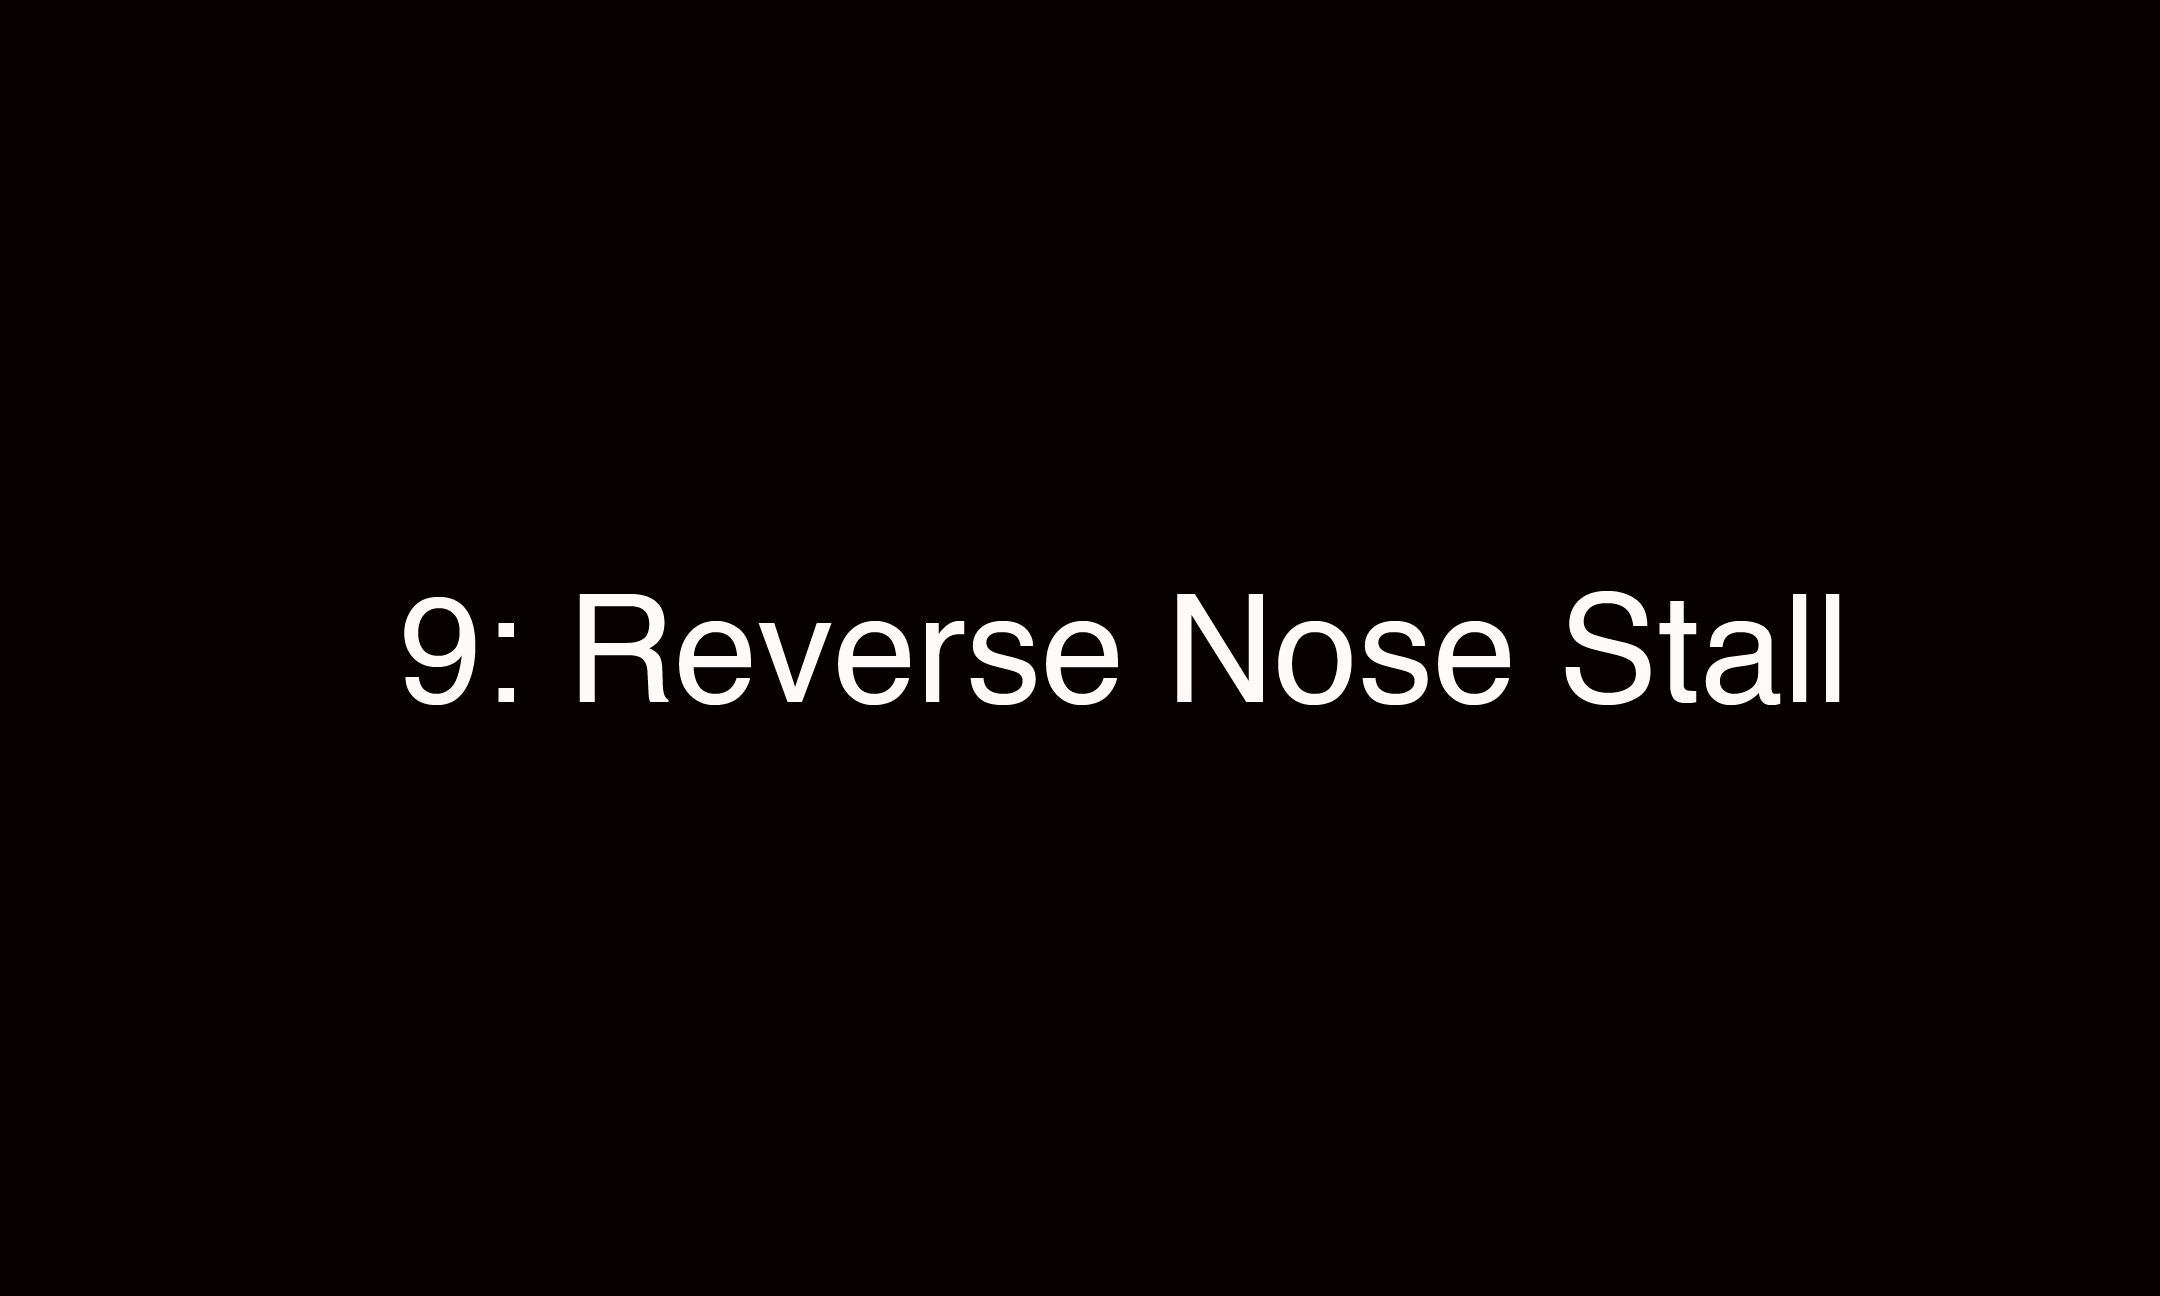 9: Reverse Nose Stall